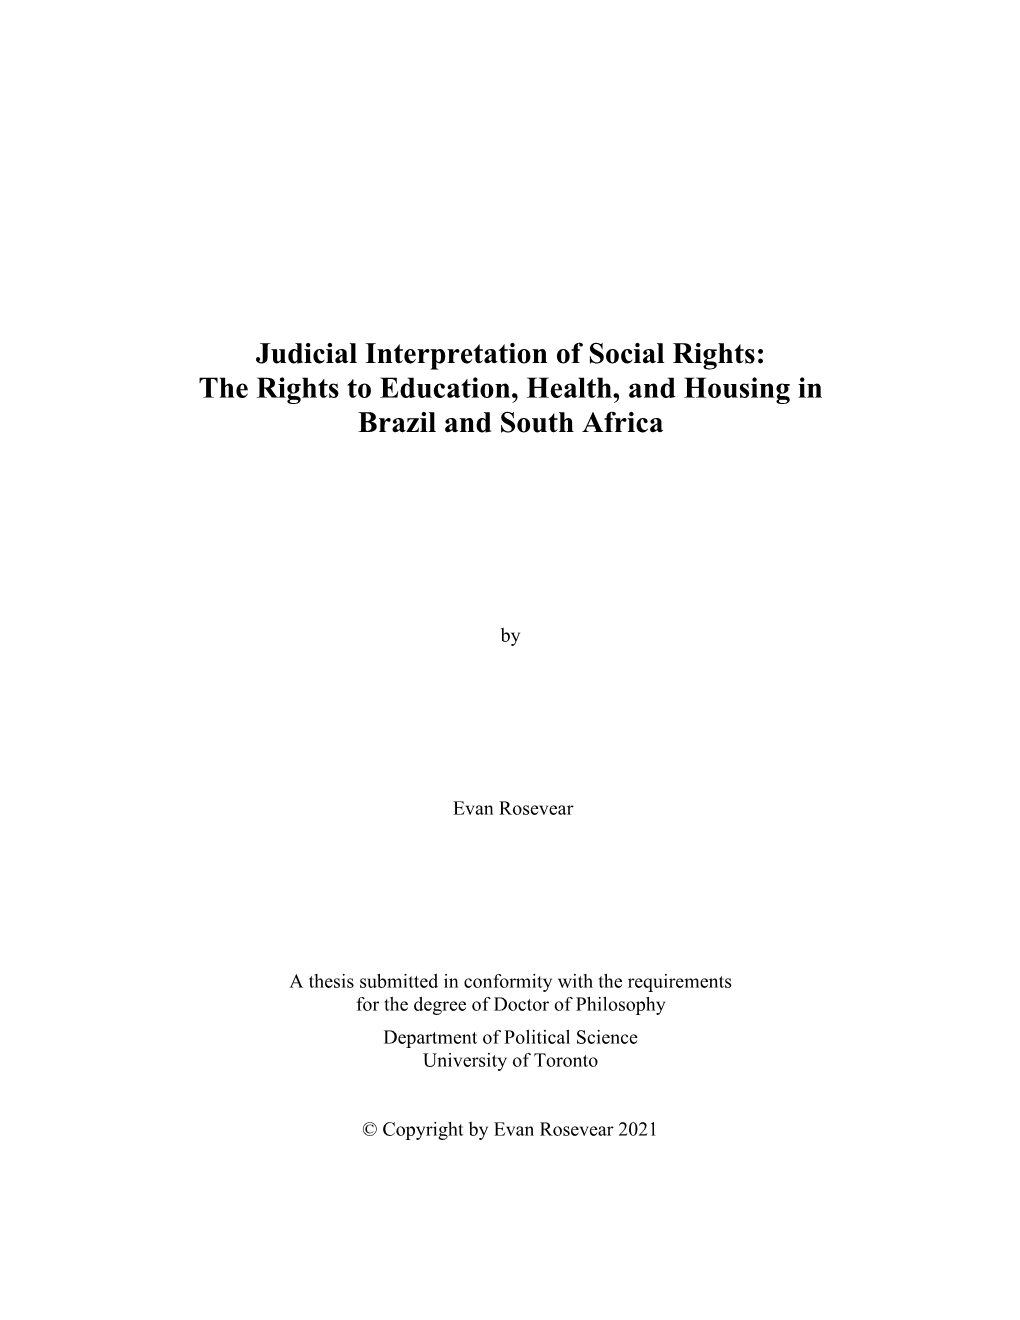 Judicial Interpretation of Social Rights: the Rights to Education, Health, and Housing in Brazil and South Africa